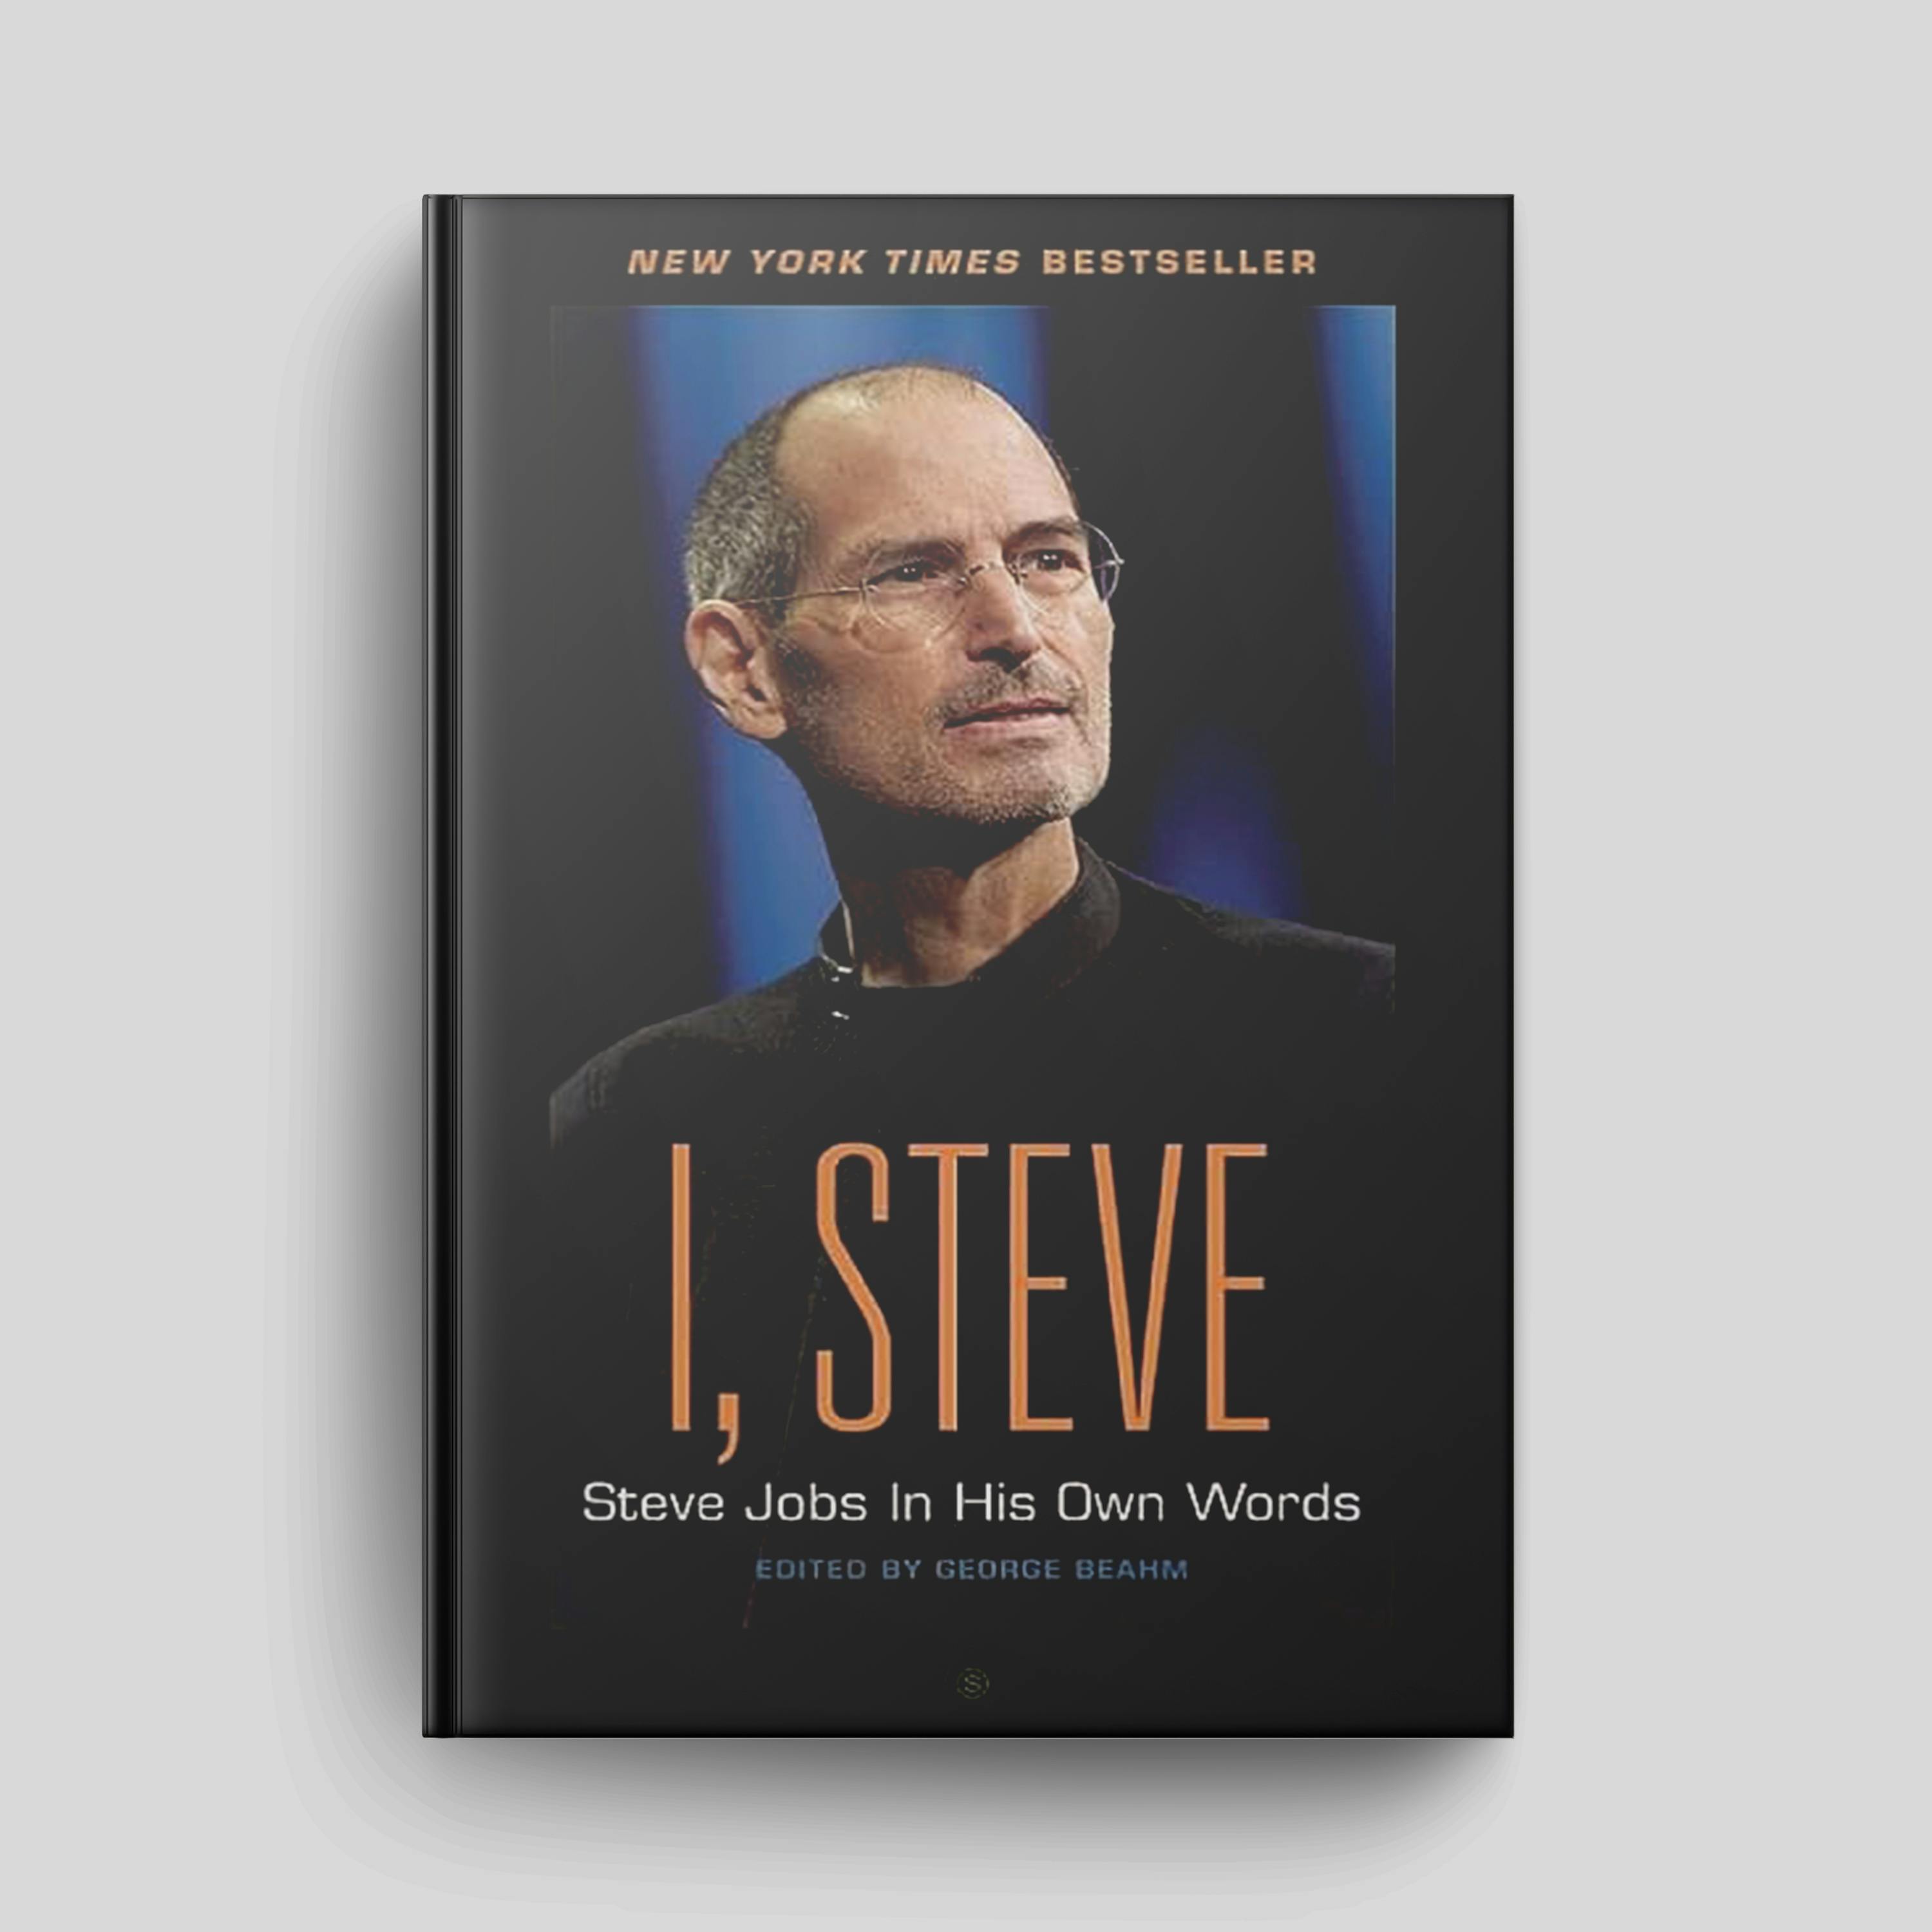 Book: ”I, Steve: Steve Jobs in his Own Words” by George Beahm | Episode #172